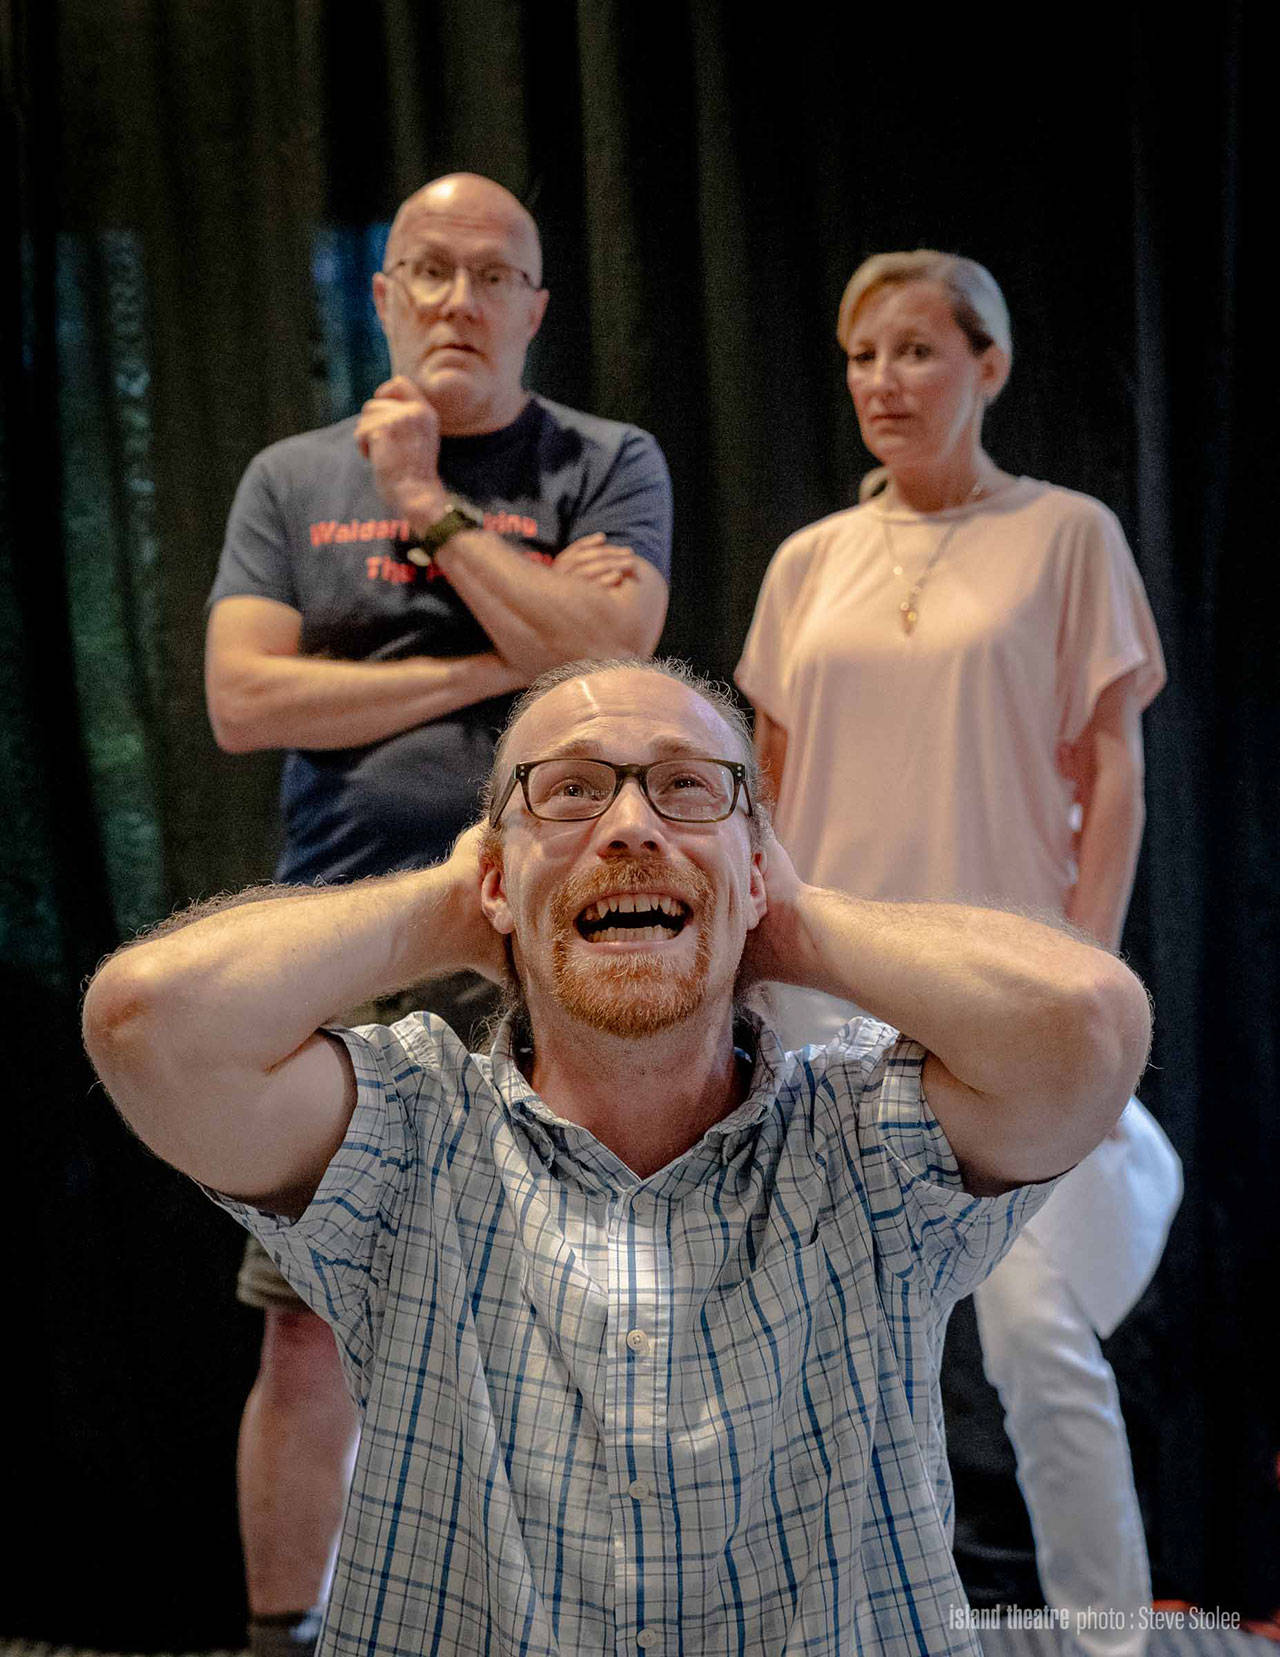 Steve Stolee photo | David Hager, Tammy Byergo and Kristopher Jones compete for a role in “Let Me Finish,” a short play by Dan Rosenberg in this year’s Island Theatre’s Ten-Minute Play Festival.